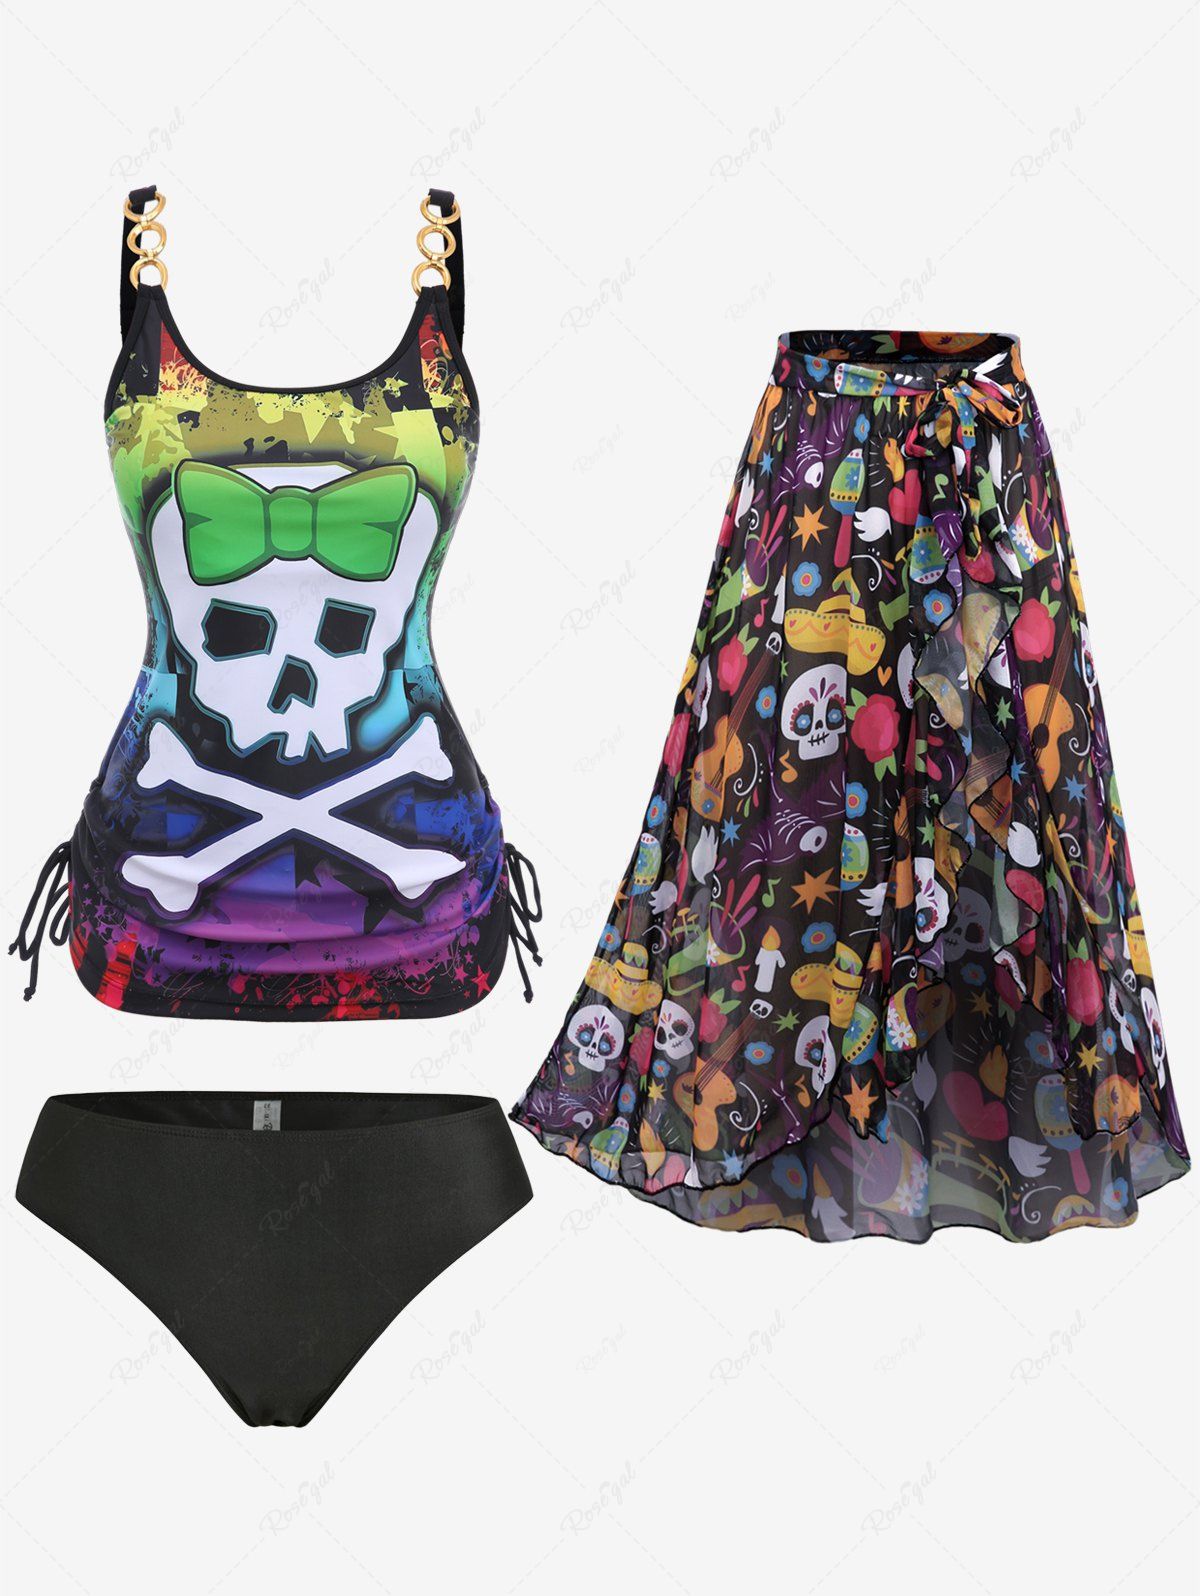 Chic Skull Bowknot Colorblock Painting Splatter Print Cinched Top and Bottom Tankini Set and Floral Mesh Wrap Flounce Asymmetric Sarong Three Piece Swimsuit  